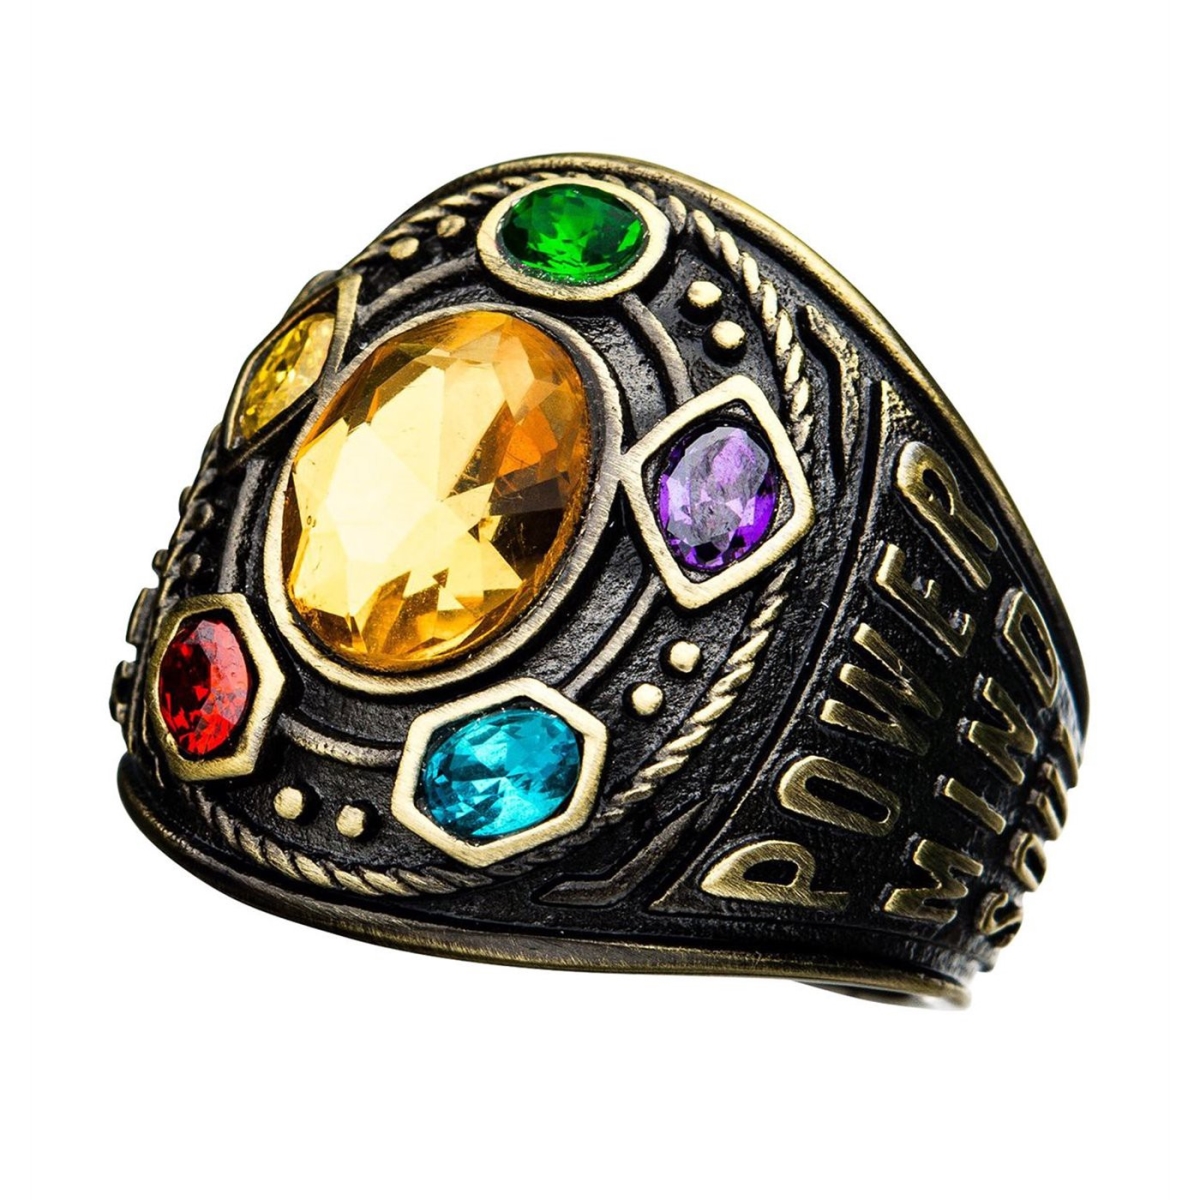 Picture of Avengers Endgame ringthanosgcoipr-12-Size 12 Avengers Endgame Infinity Gauntlet Class of Infinite Power Ring - Size 12